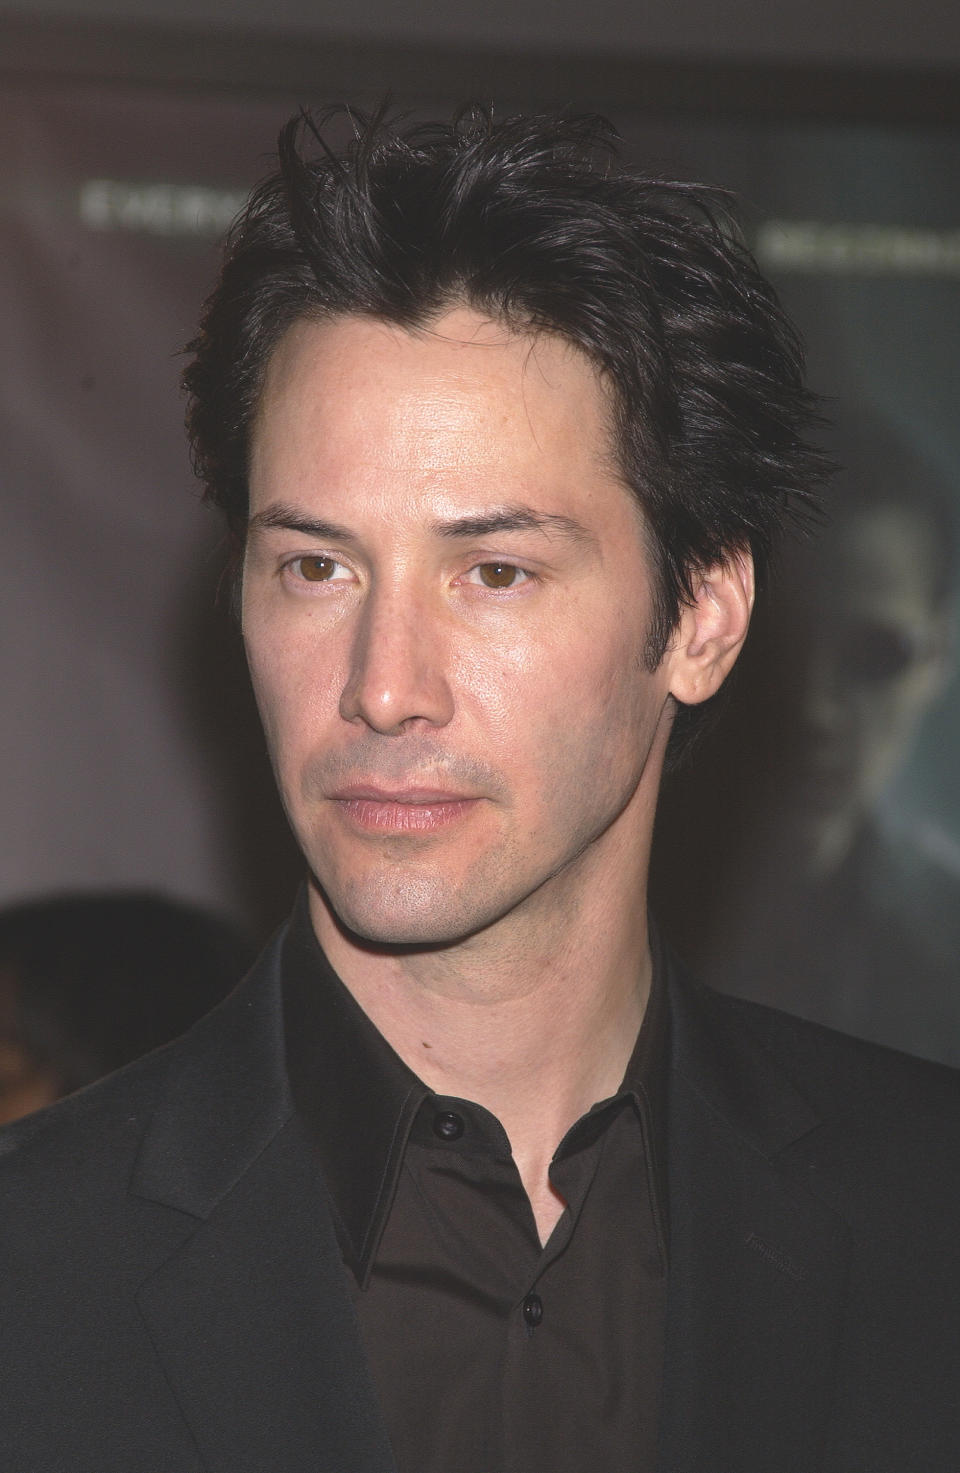 Keanu Reeves arrives at the premiere of The Matrix Revolutions